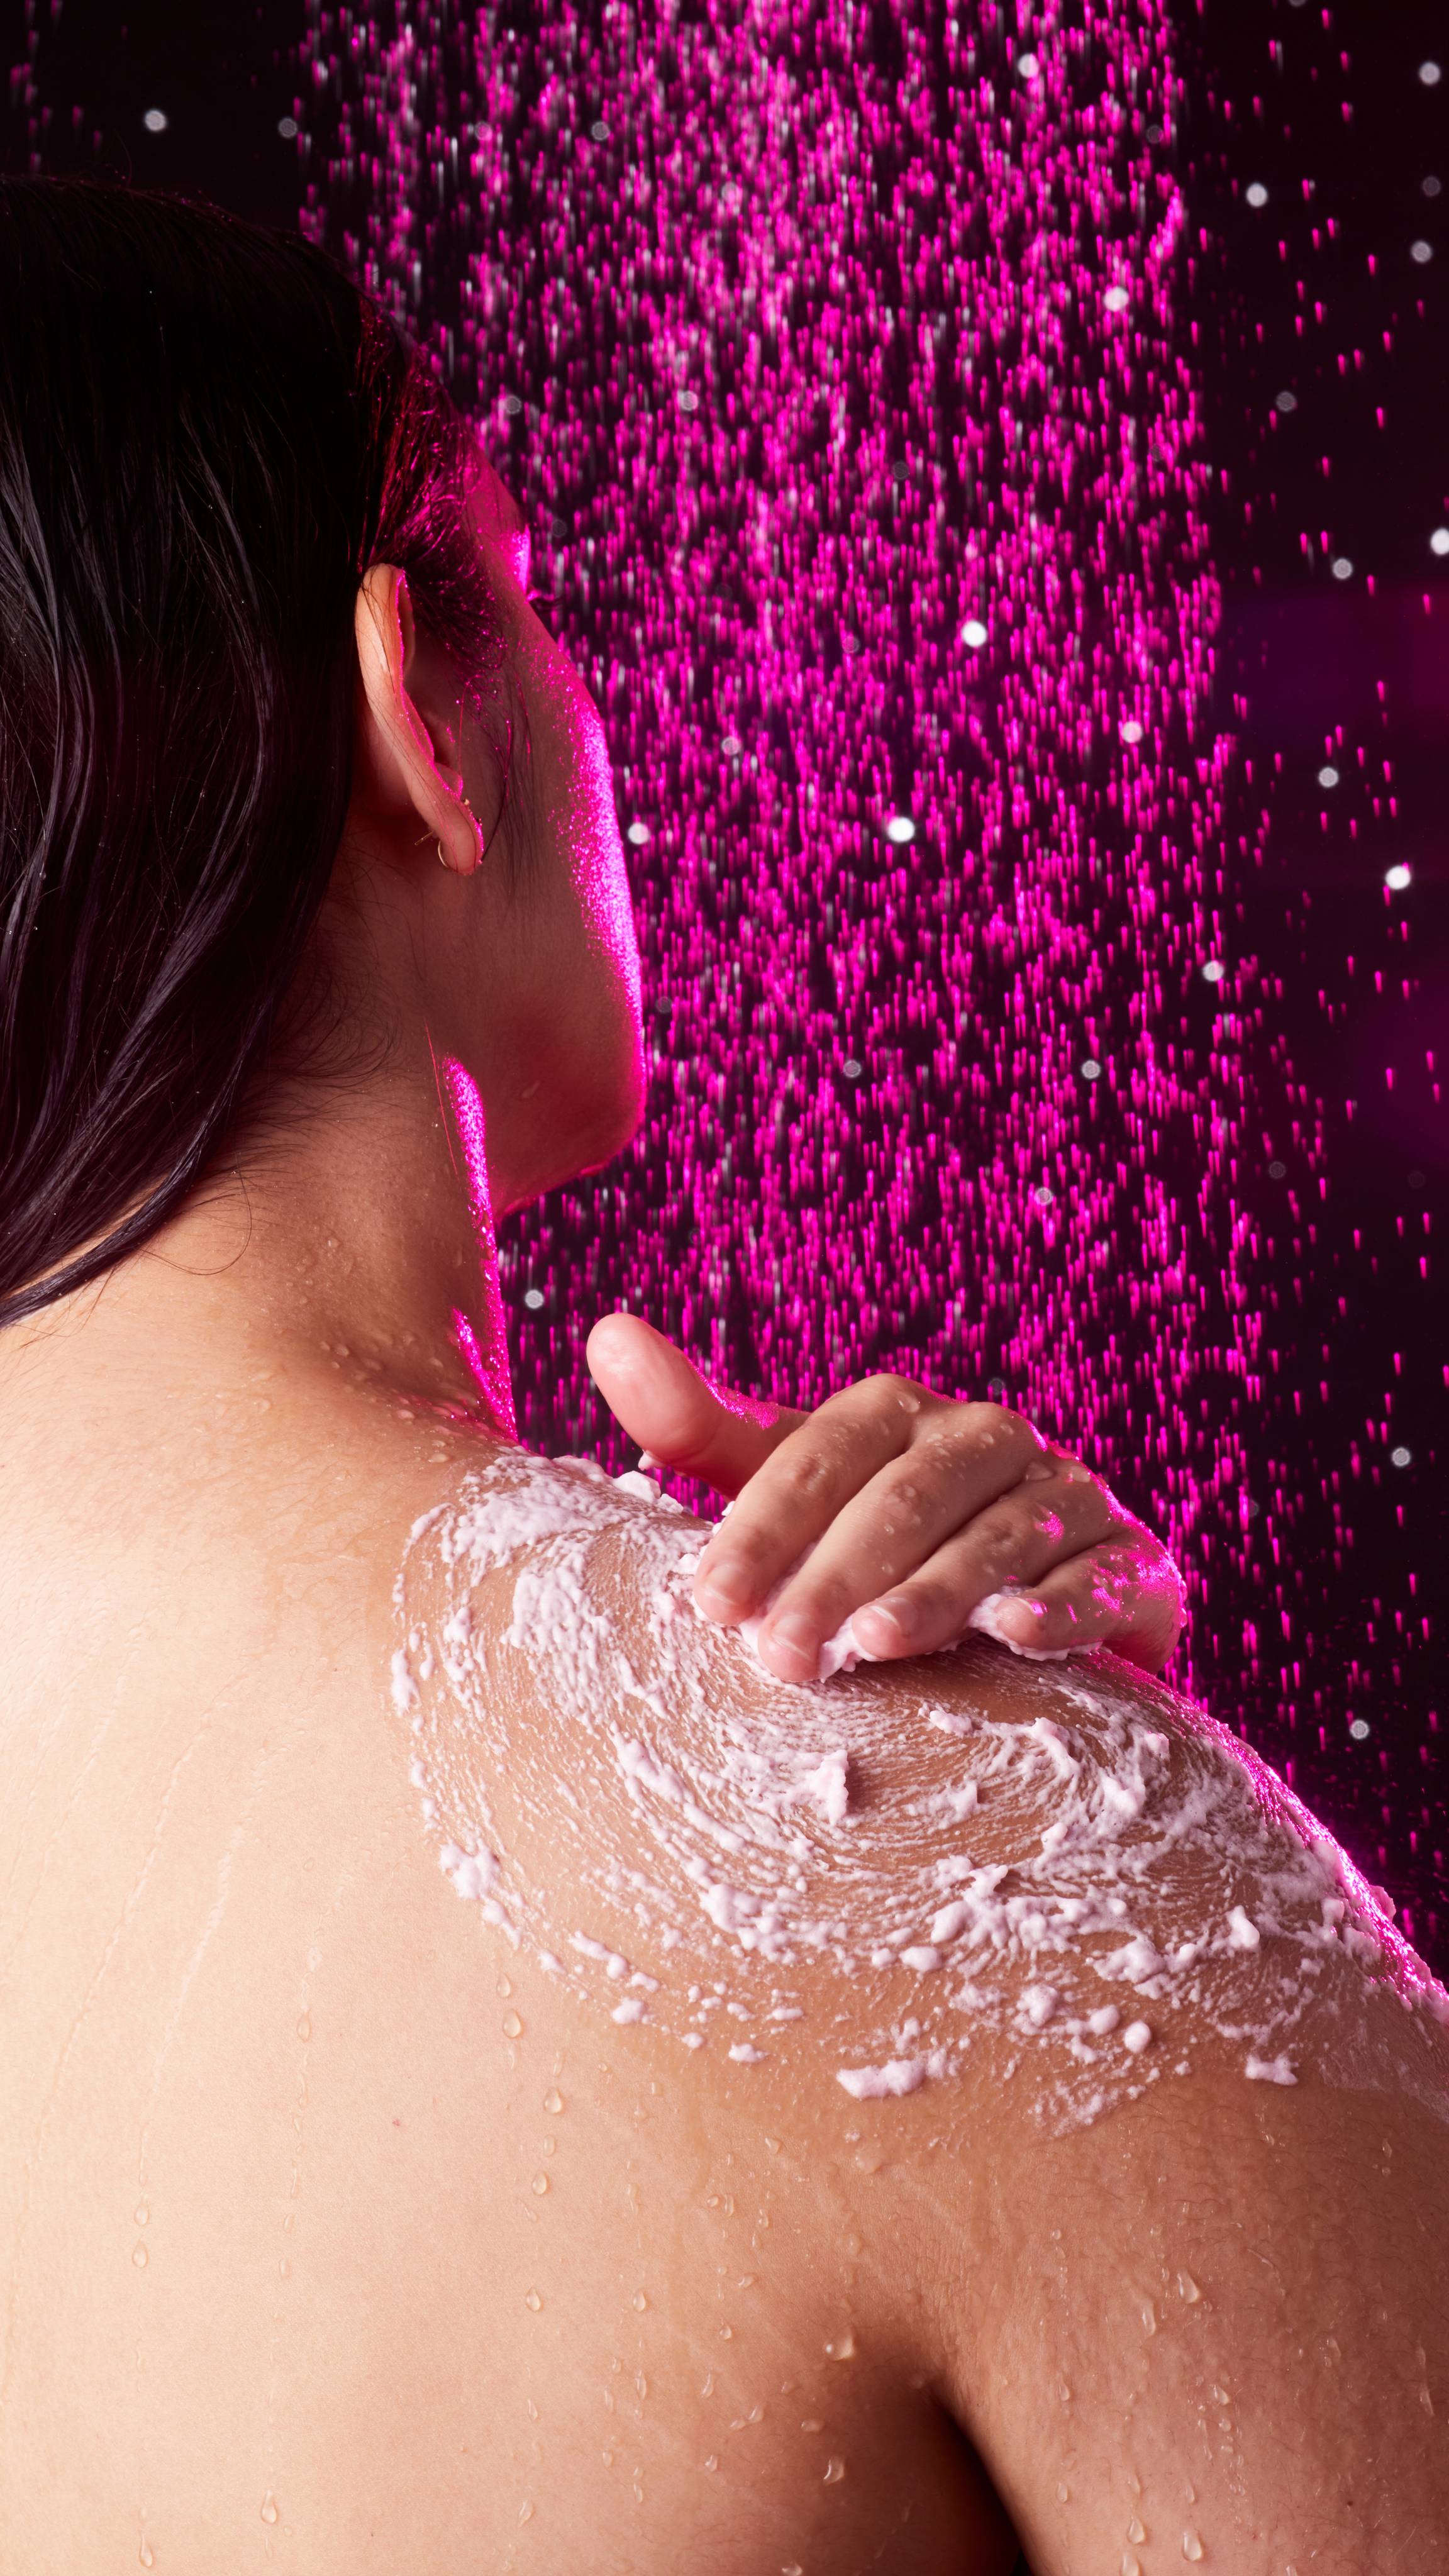 Model is in the shower facing away as they reach to exfoliate their shoulder with the product in circular motions.